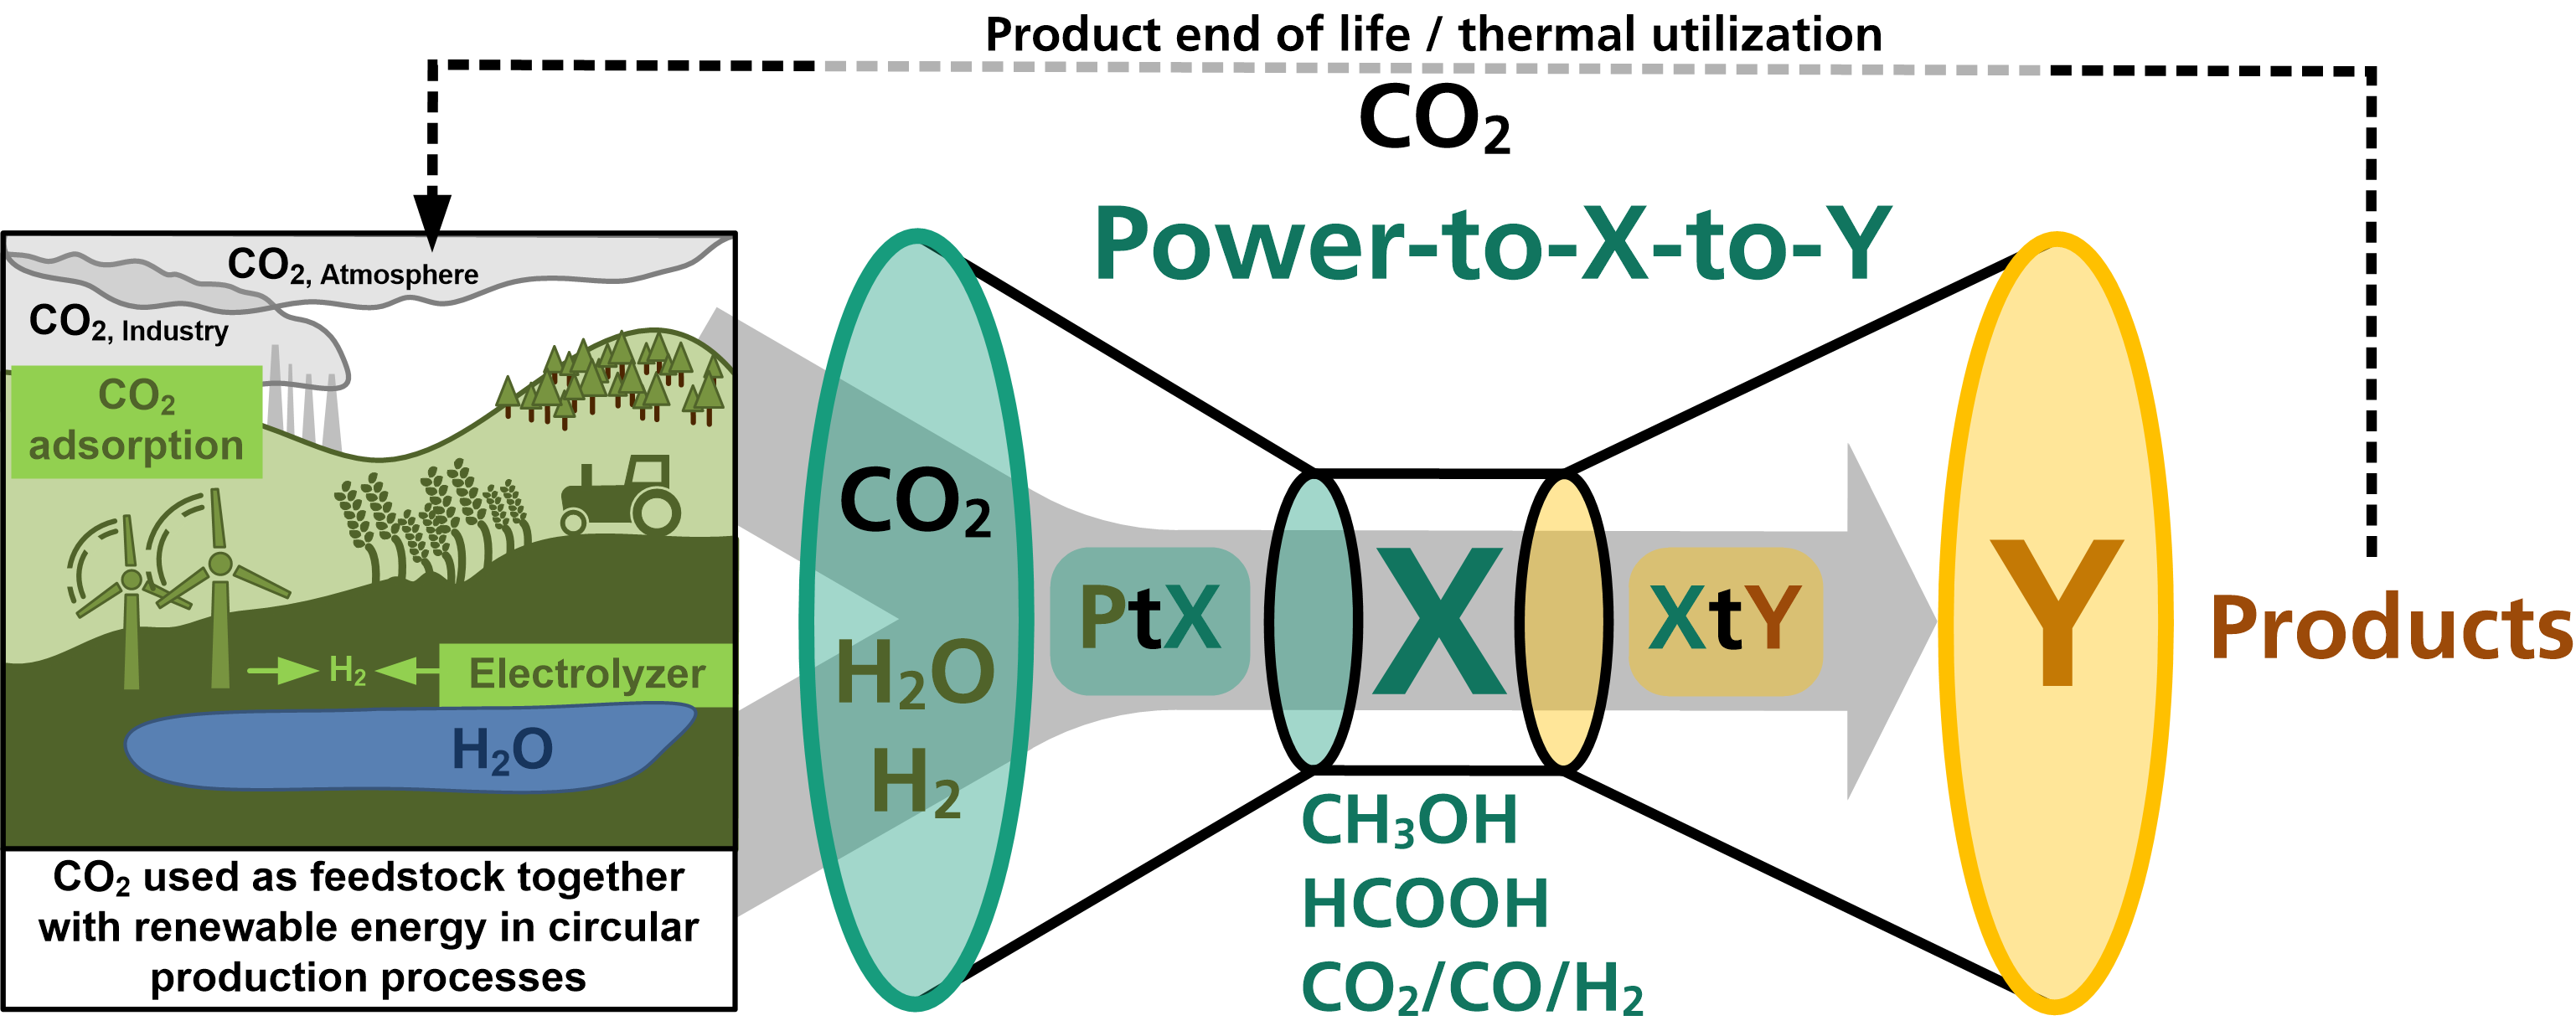 Extension of the power-to-X approach towards a power-to-X-to-Y concept pursued by Fraunhofer IGB. Initially (power-to-X) the greenhouse gas CO<sub>2</sub> is converted into high-energy intermediates like methanol (CH<sub>3</sub>OH) and formic acid (HCOOH). The application of conjoined chemical or biotechnological processes (X-to-Y), which utilize these intermediates as feedstock enable access to a wide range of products with increased added-value, thus transforming CO<sub>2</sub> into a useful primary resource.